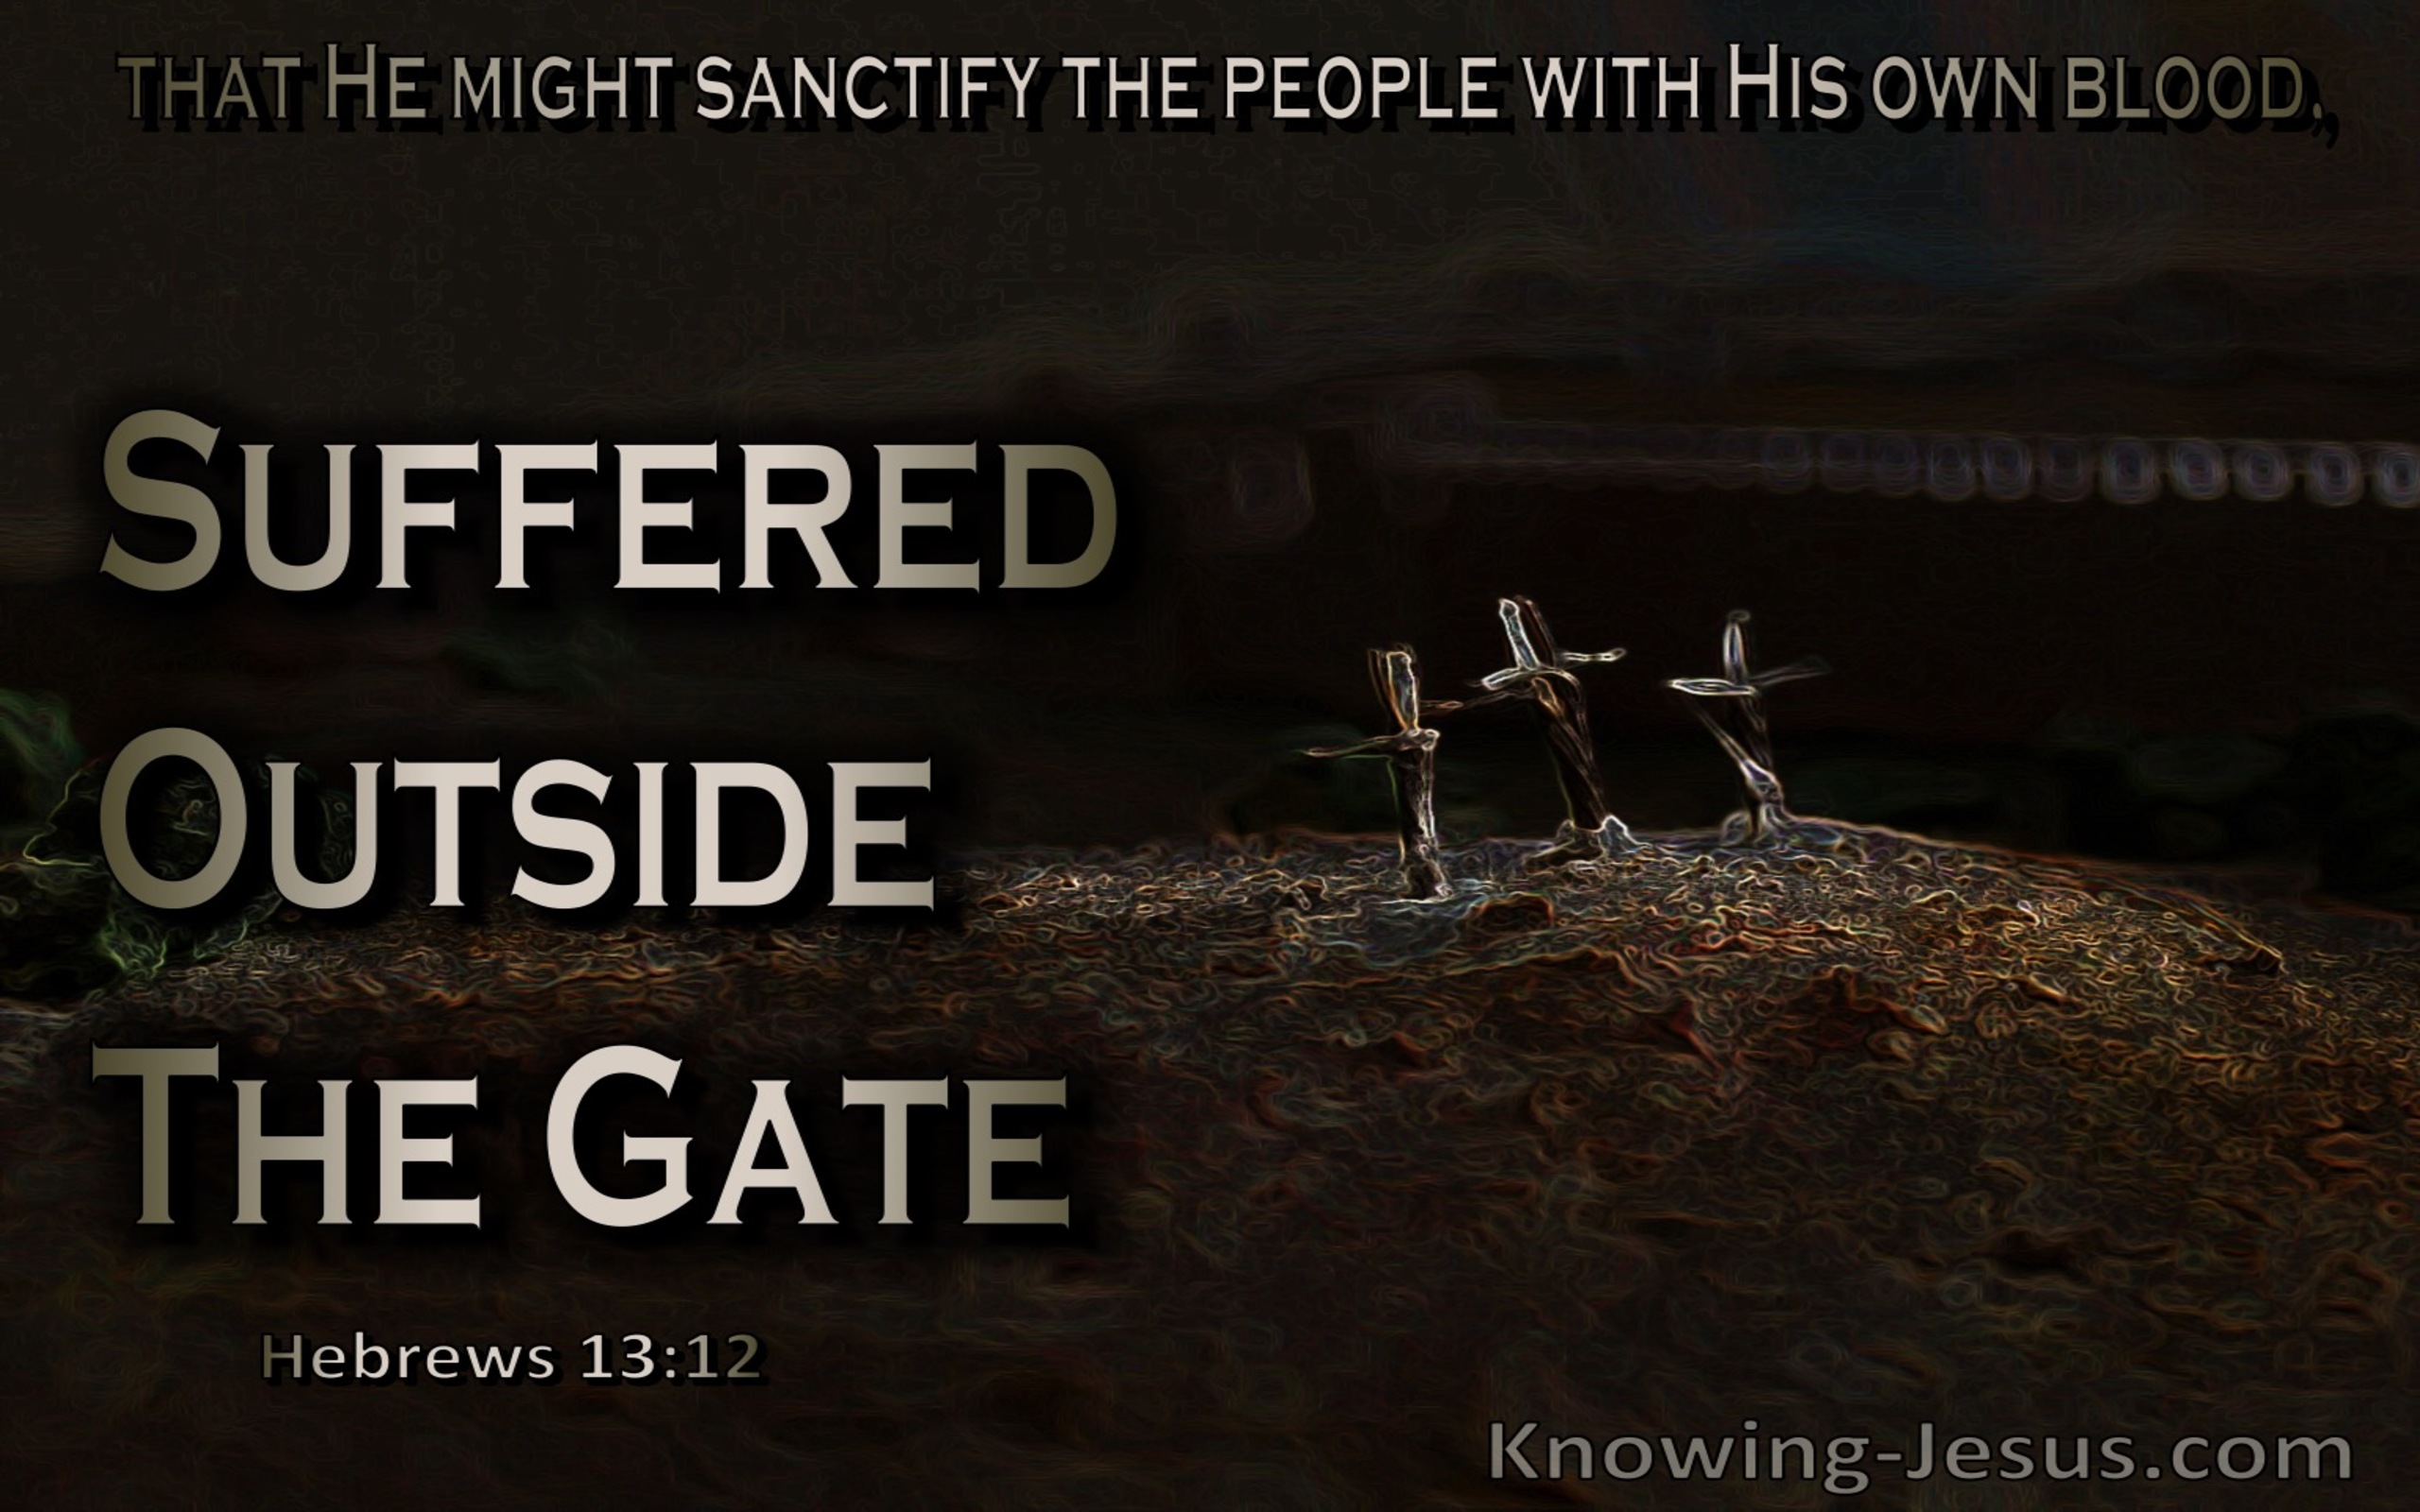 Hebrews 13:12 The He Night Sanctify The People With His Own Blood Suffered Outside The Gate (black)